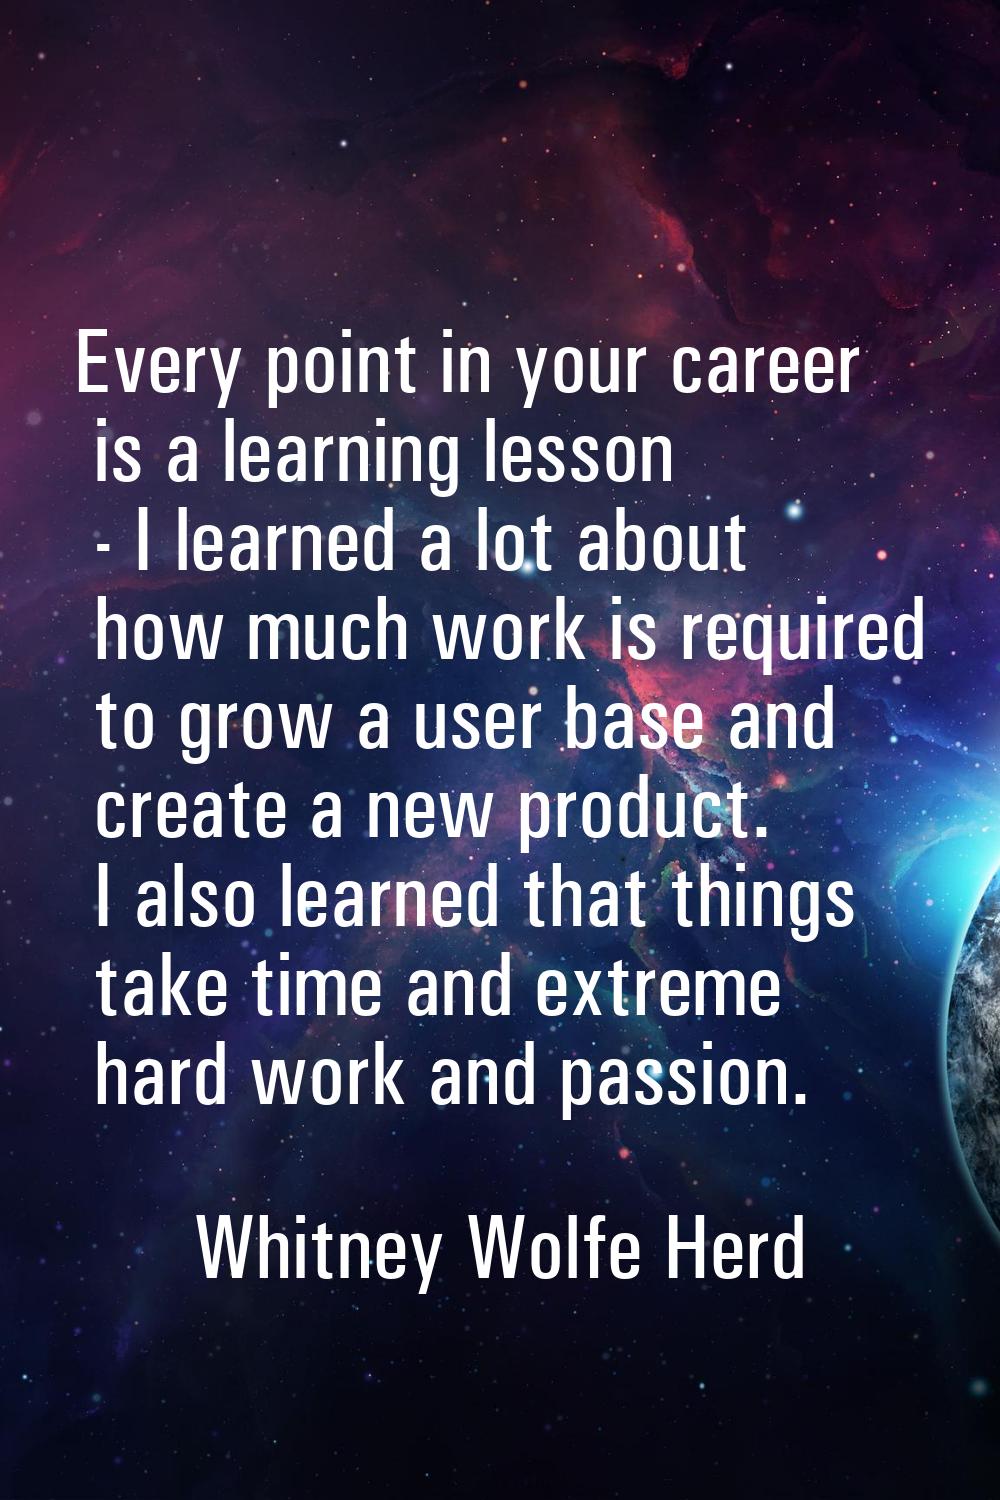 Every point in your career is a learning lesson - I learned a lot about how much work is required t